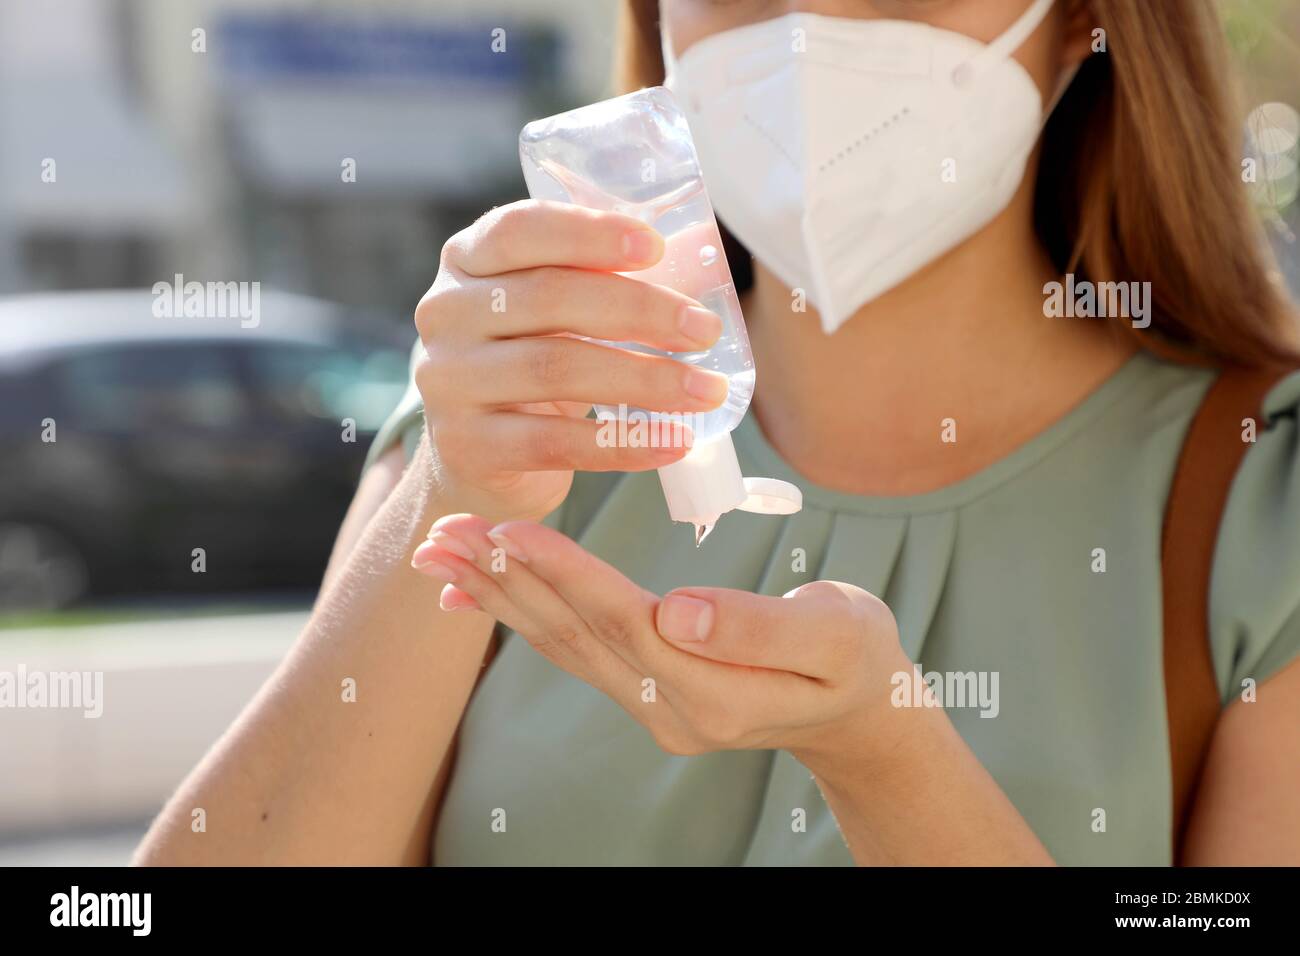 COVID-19 Pandemic Coronavirus Close up Unidentified Woman with KN95 FFP2 Mask using Alcohol Gel Sanitizer Hands in City Street. Antiseptic, Hygiene an Stock Photo